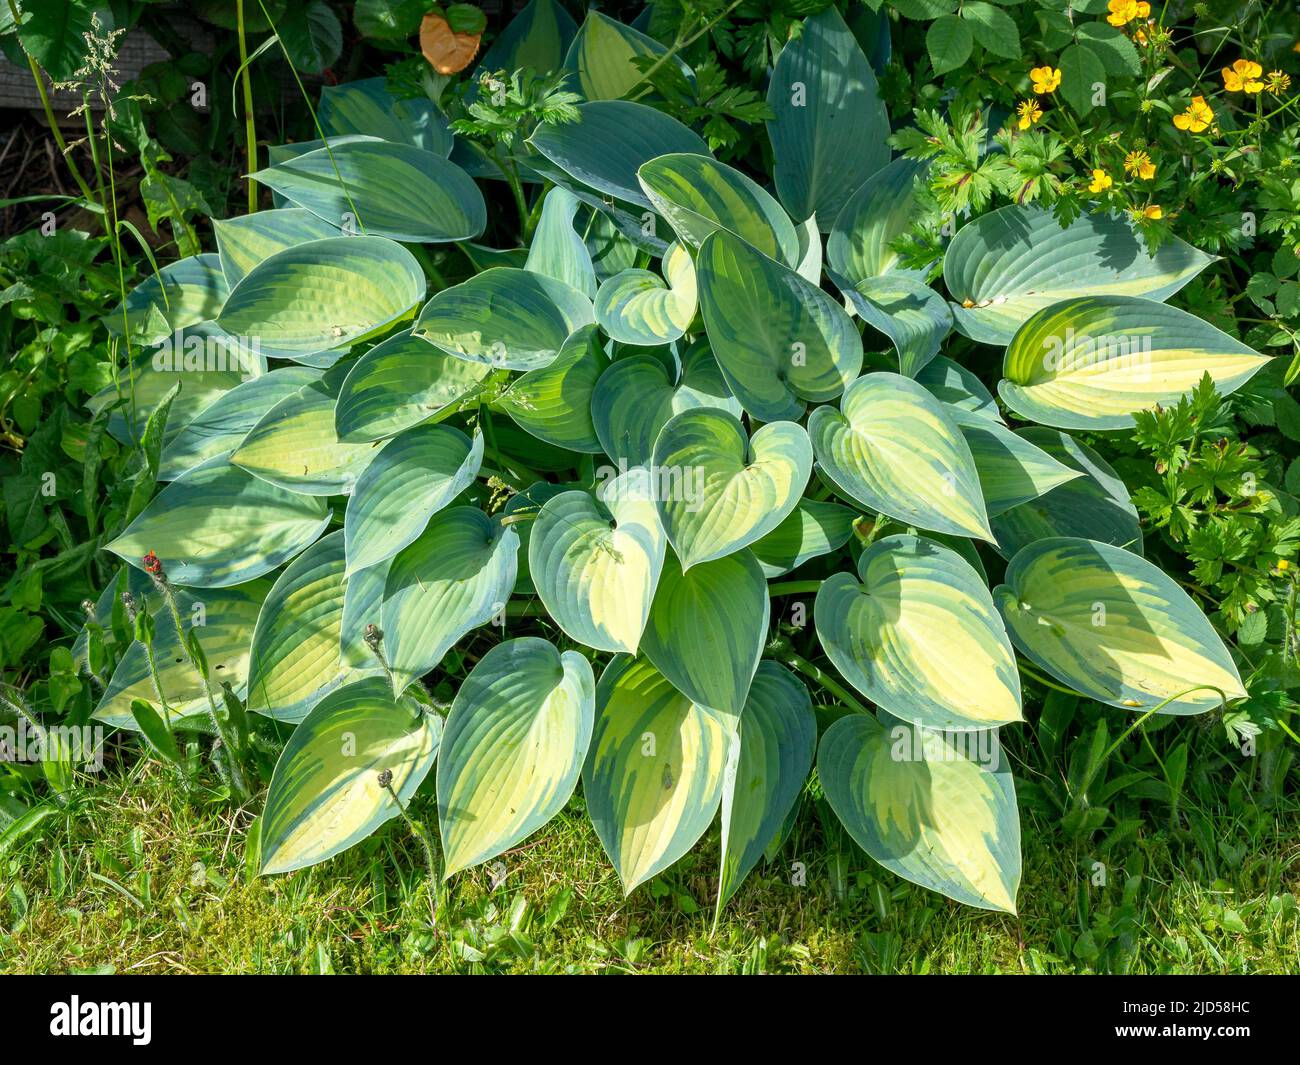 Large Hosta plant variety June in a garden Stock Photo